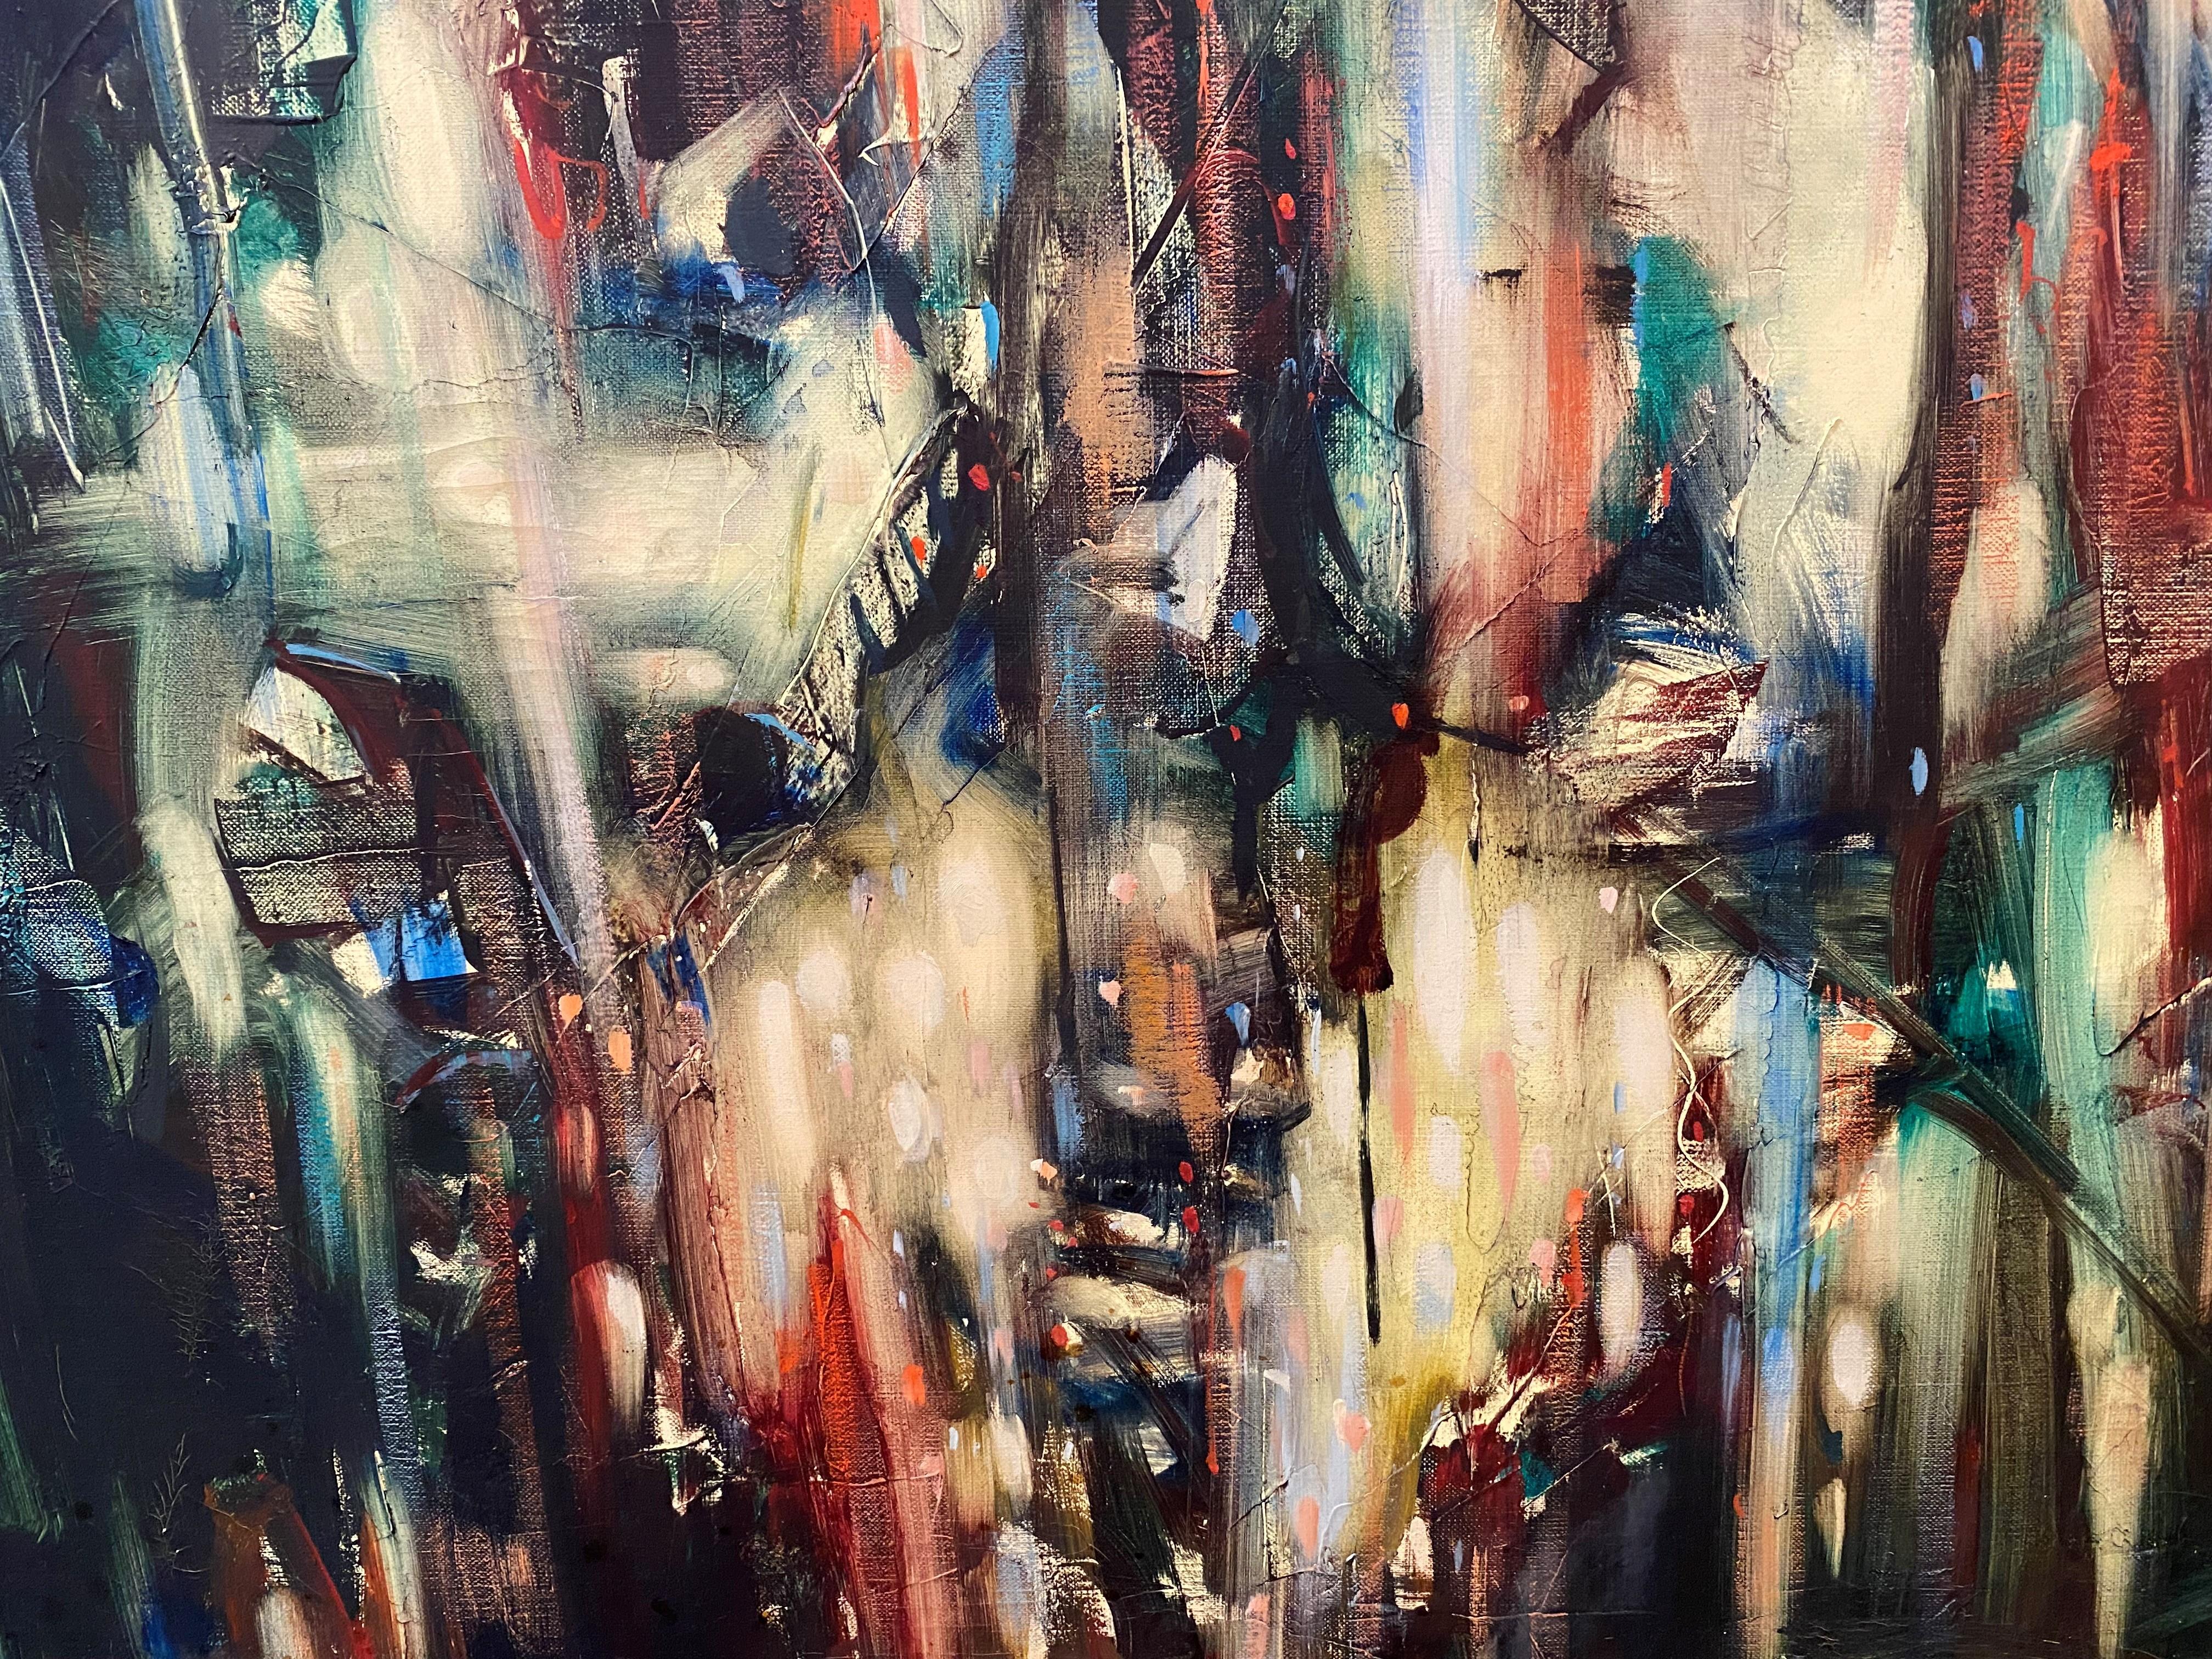 Lords of the City  - Abstract Expressionist Painting by Robert Anderson